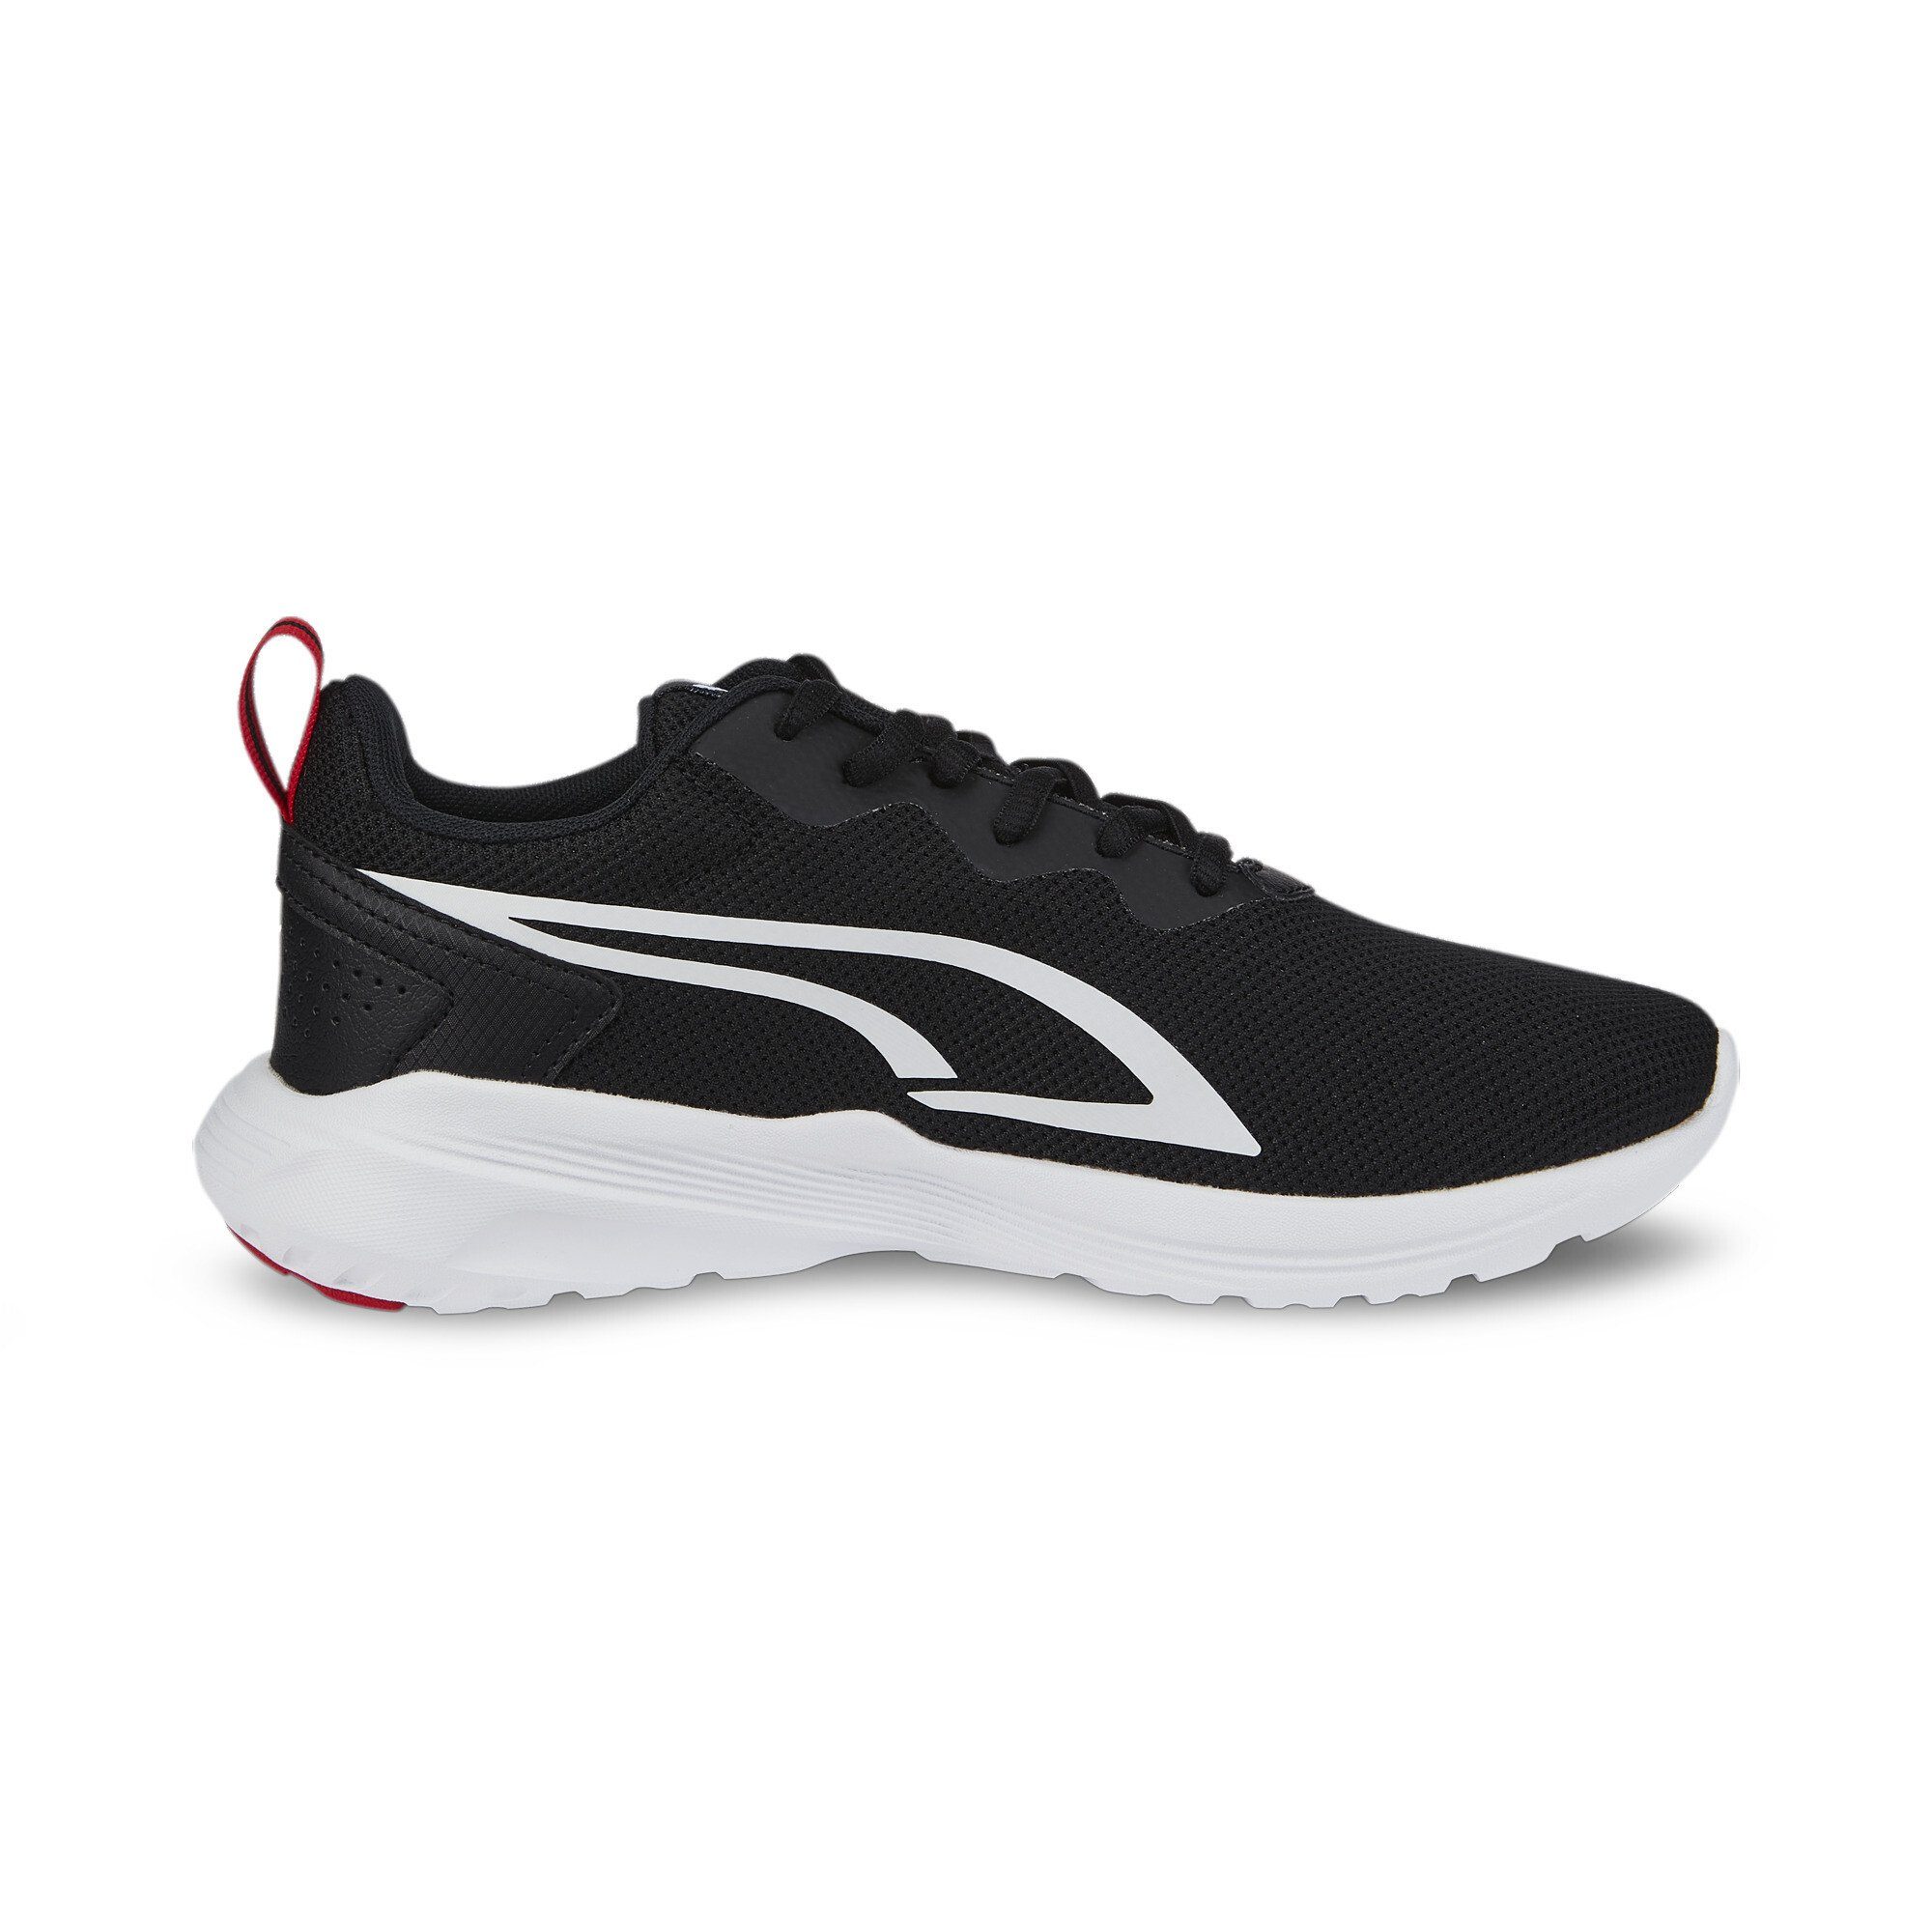 PUMA All Day Active Sneakers Sneaker Jugendliche Black White